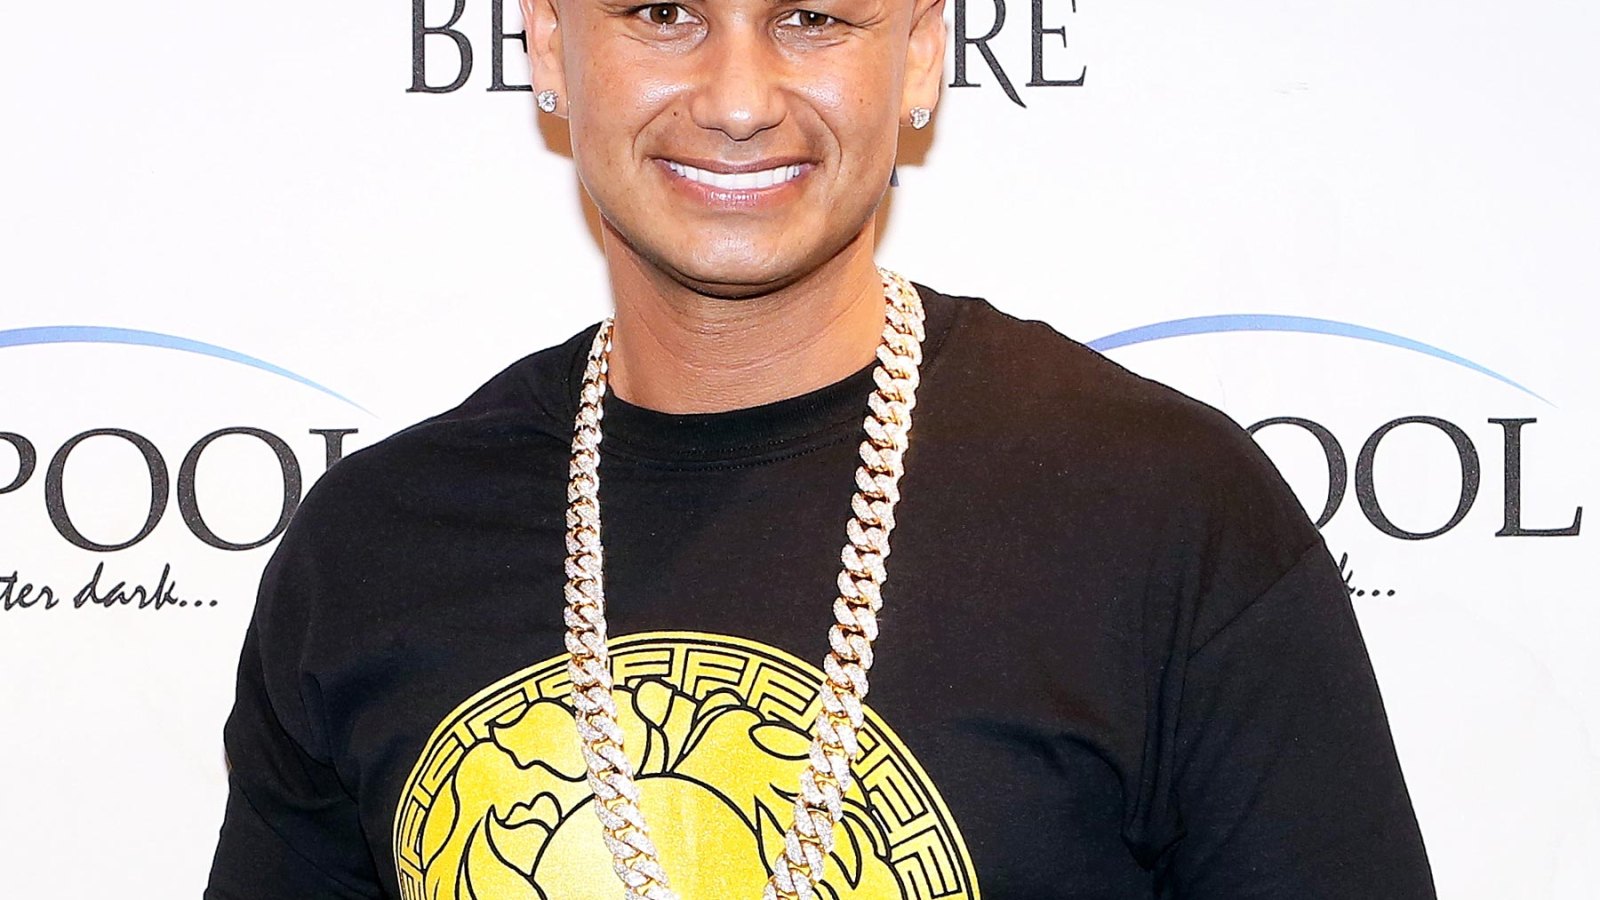 Jersey Shore's Pauly D celebrates daughter's birthday, girlfriend